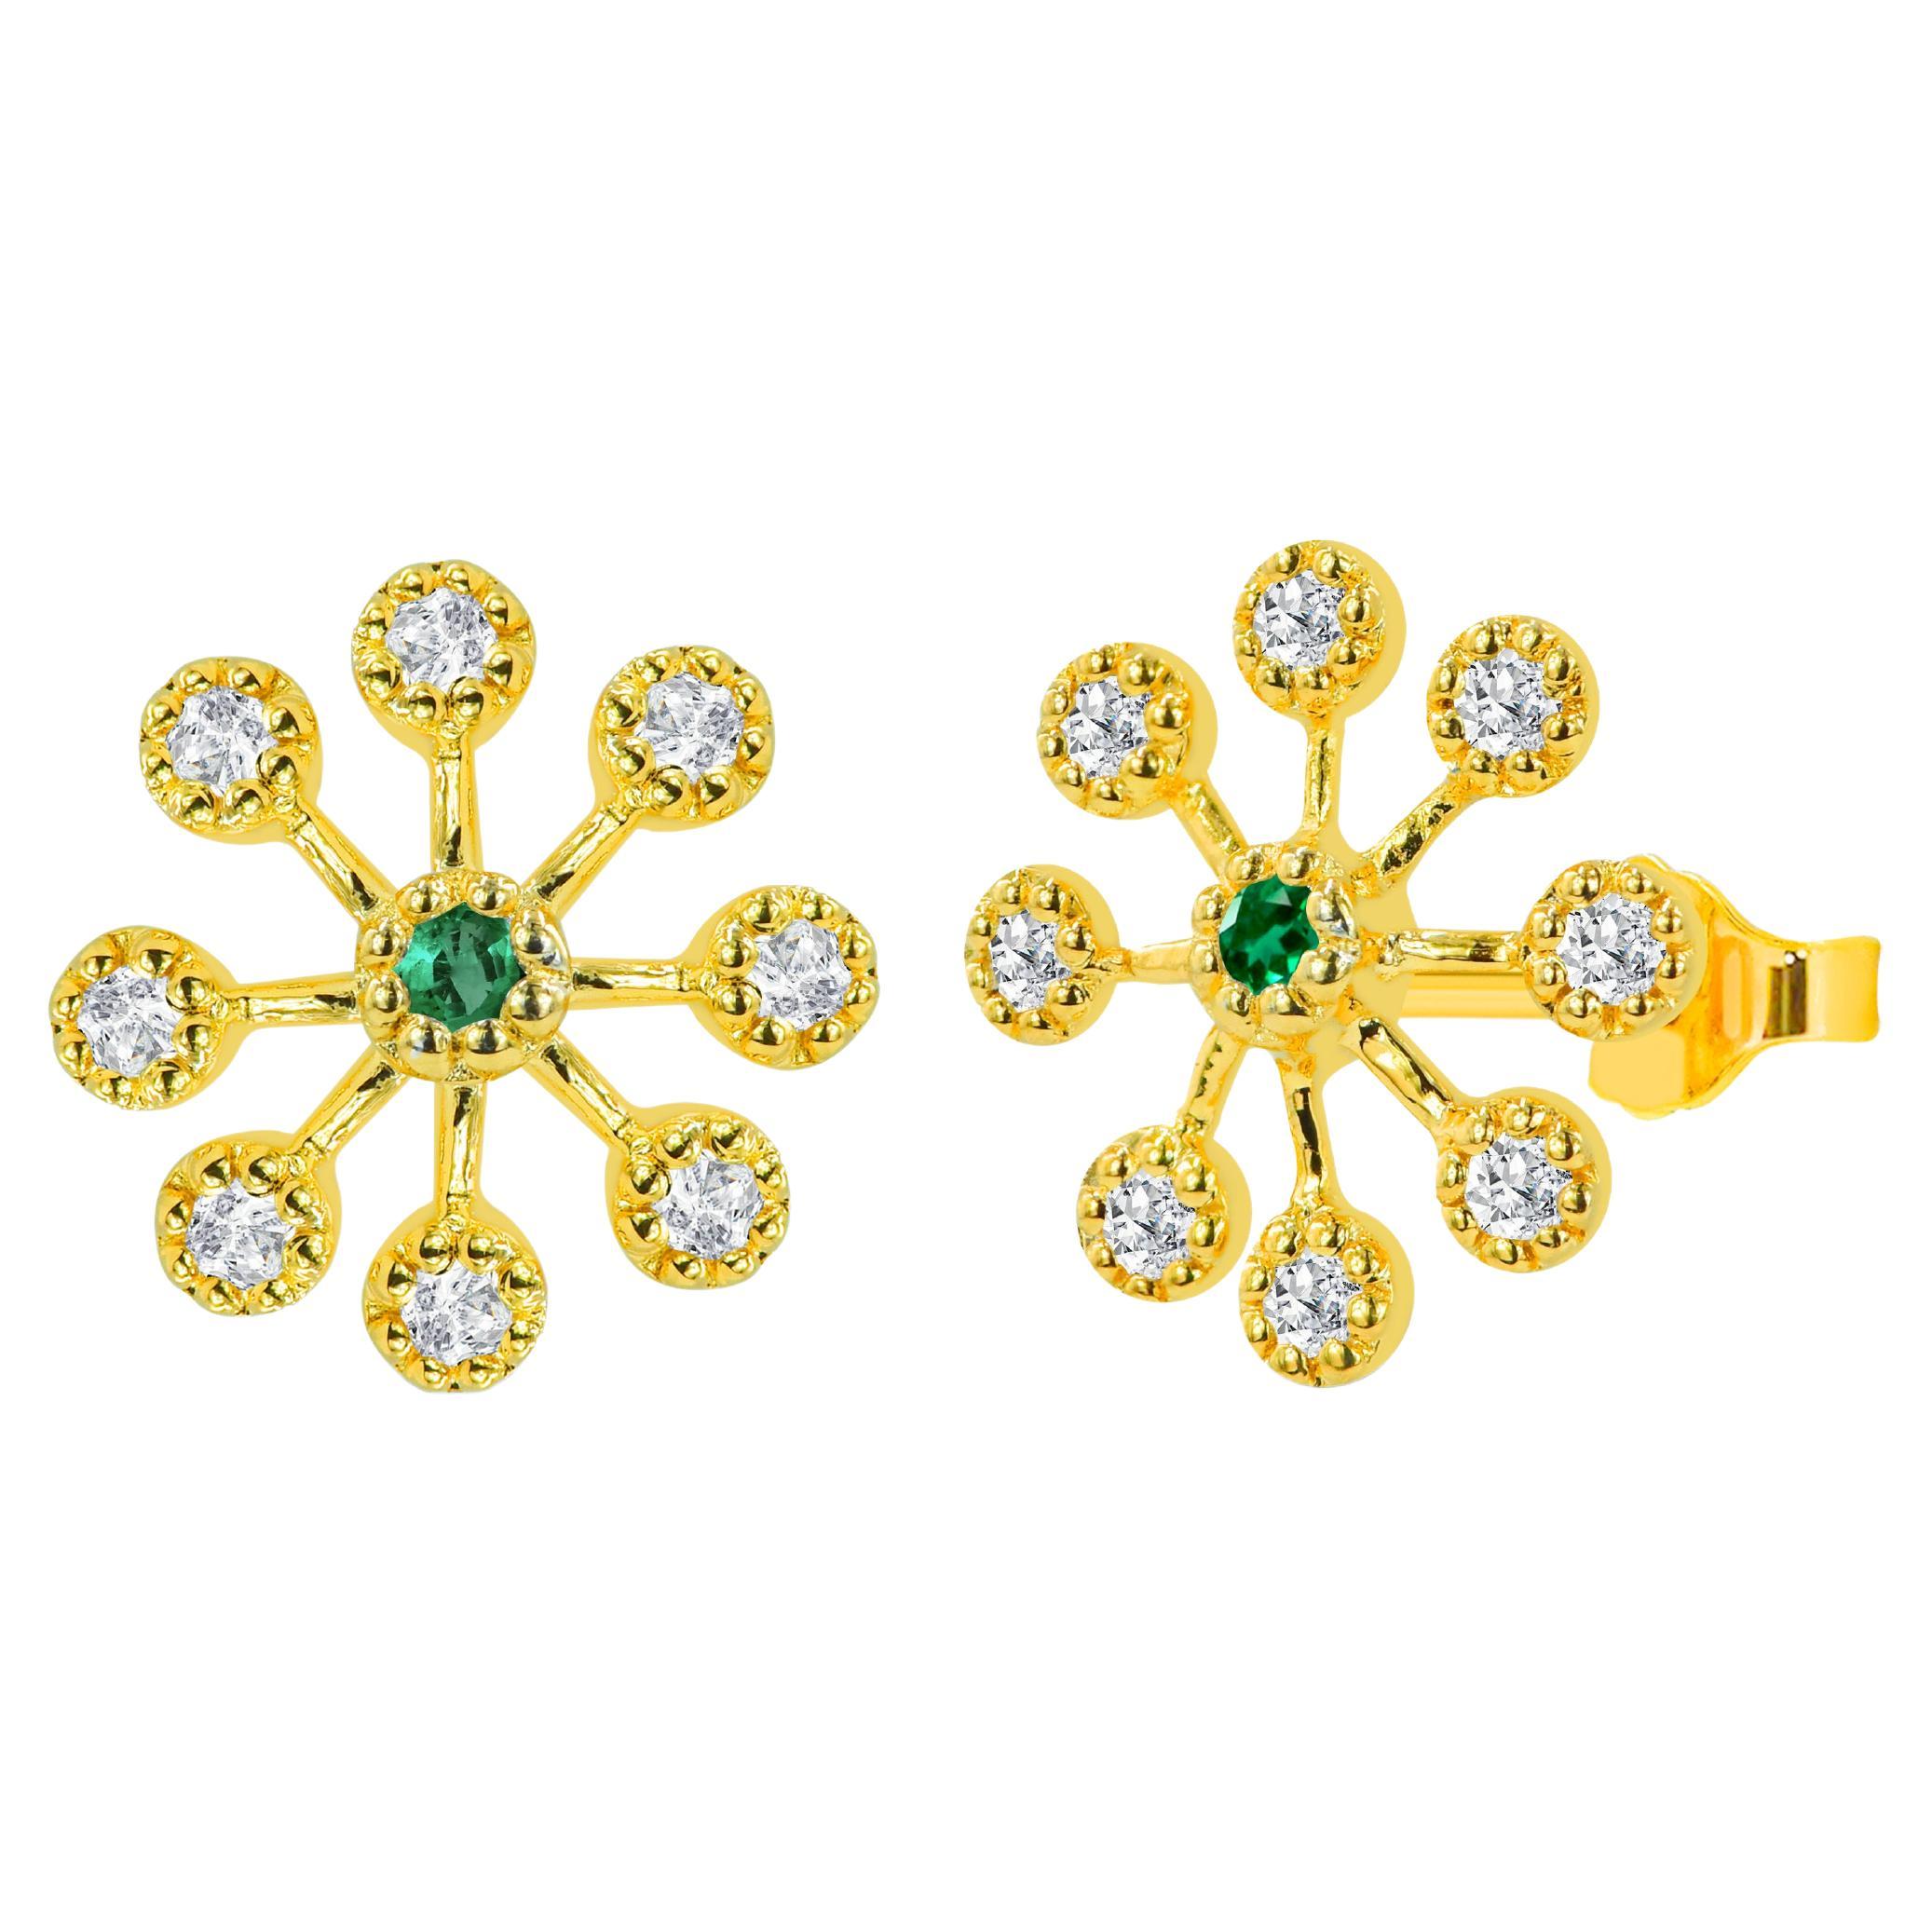 0.30ct Ruby, Emerald and Sapphire Bezel Flower Studs with Diamonds in 18k Gold